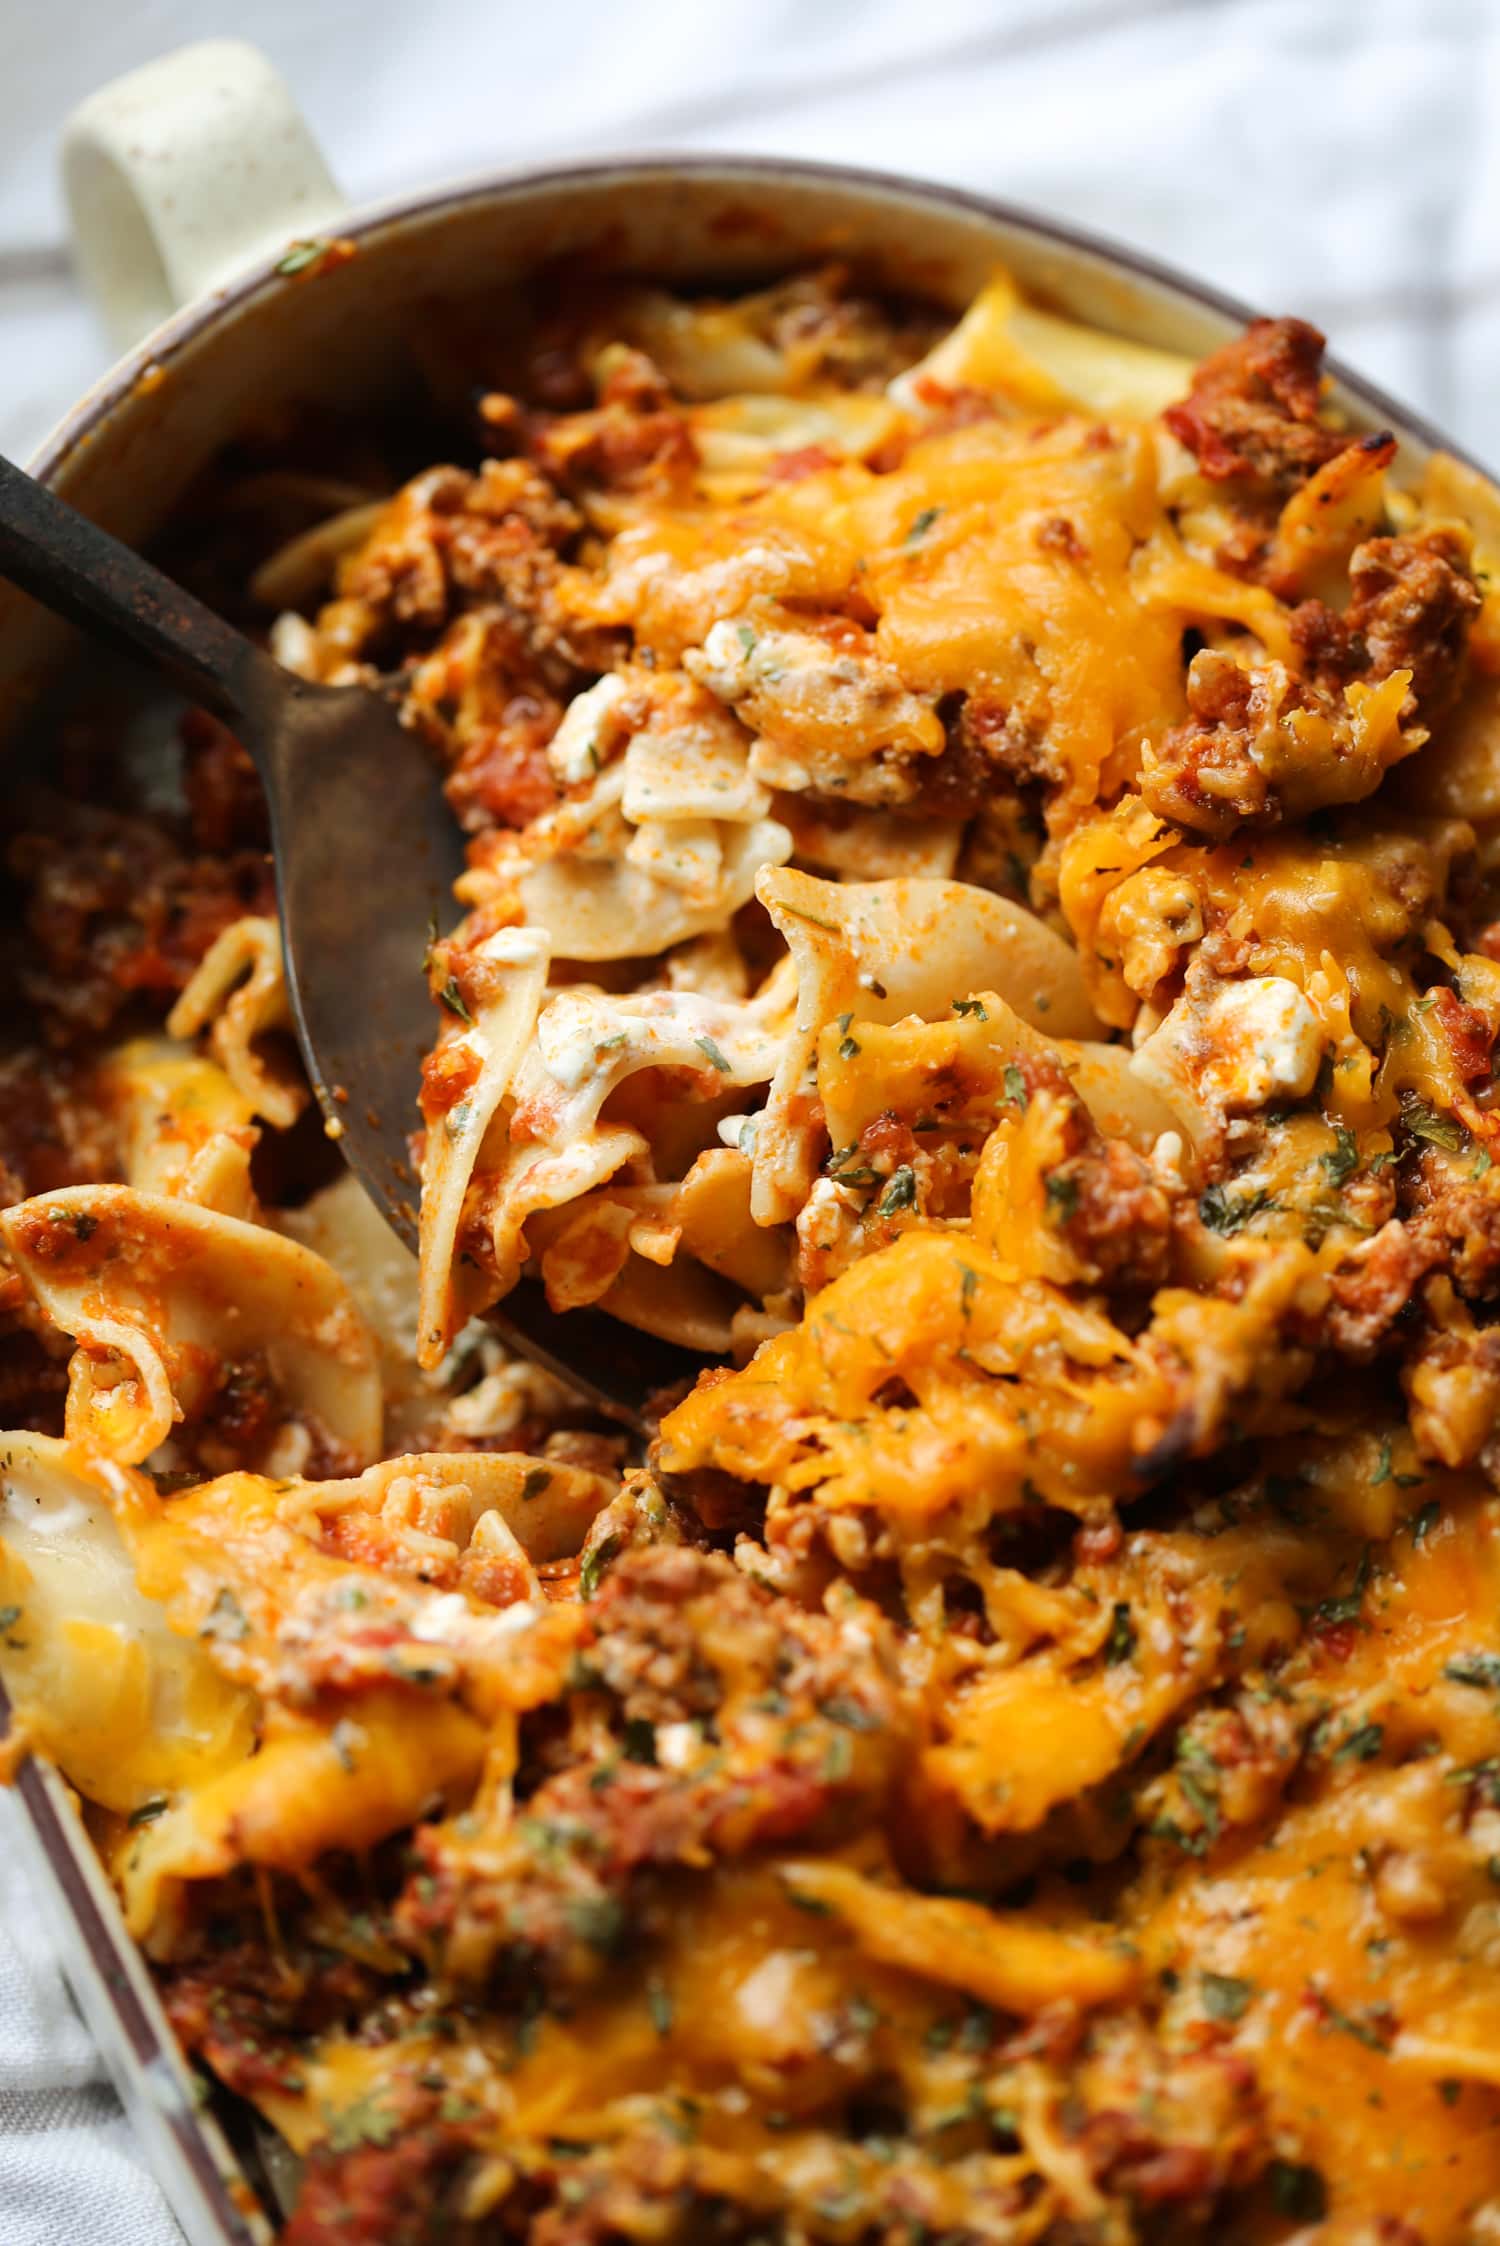 Sour cream pasta bake in a casserole dish with a spoon.